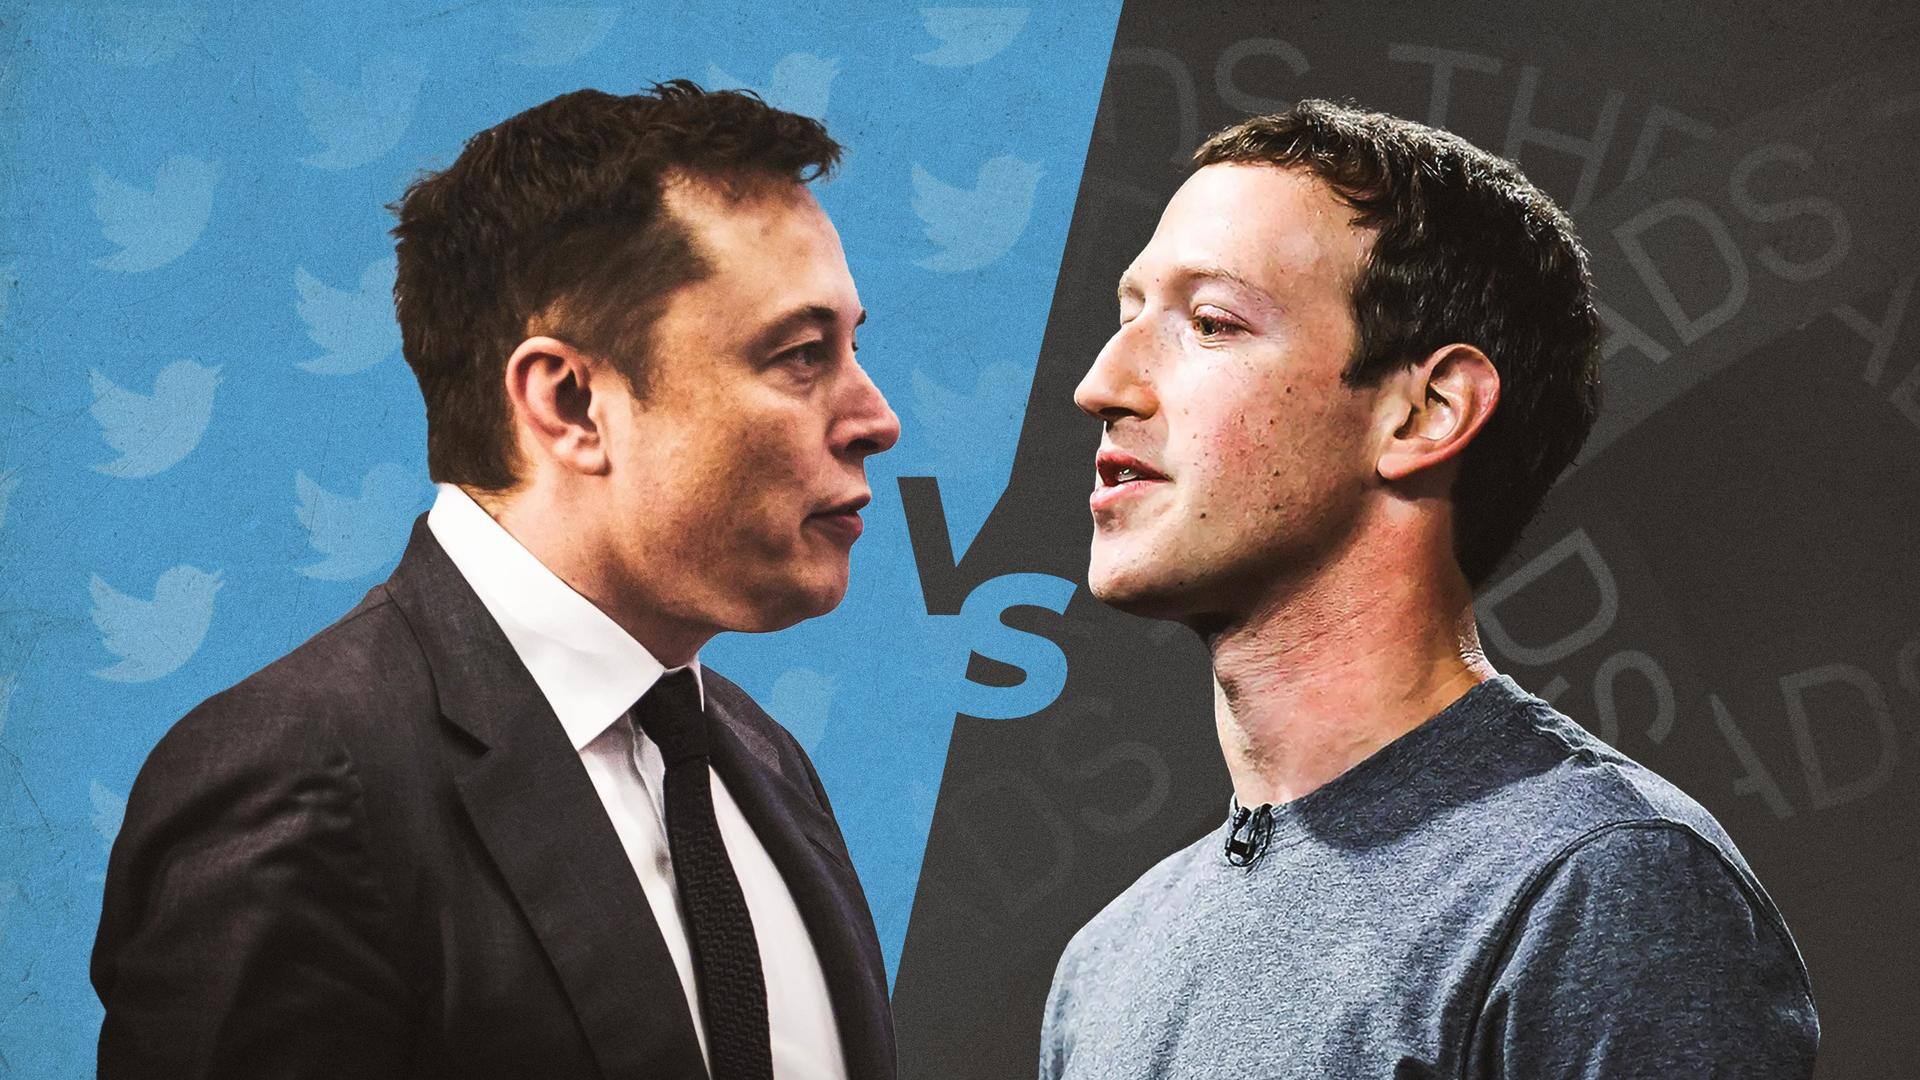 Threads v/s Twitter is cage match between Zuckerberg and Musk